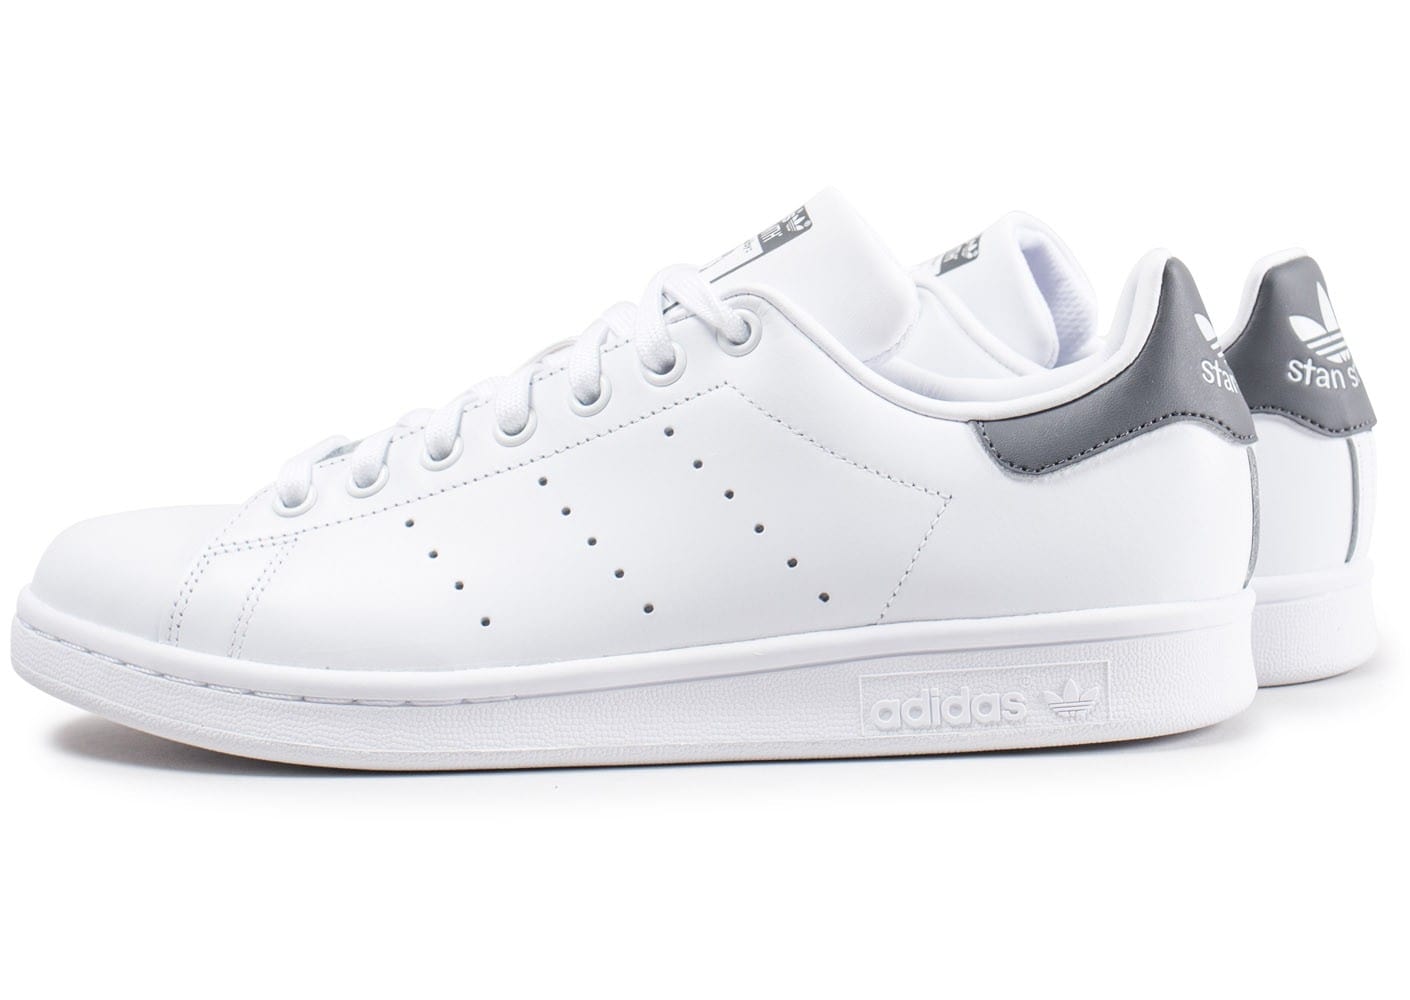 adidas stan smith croco homme chaussure